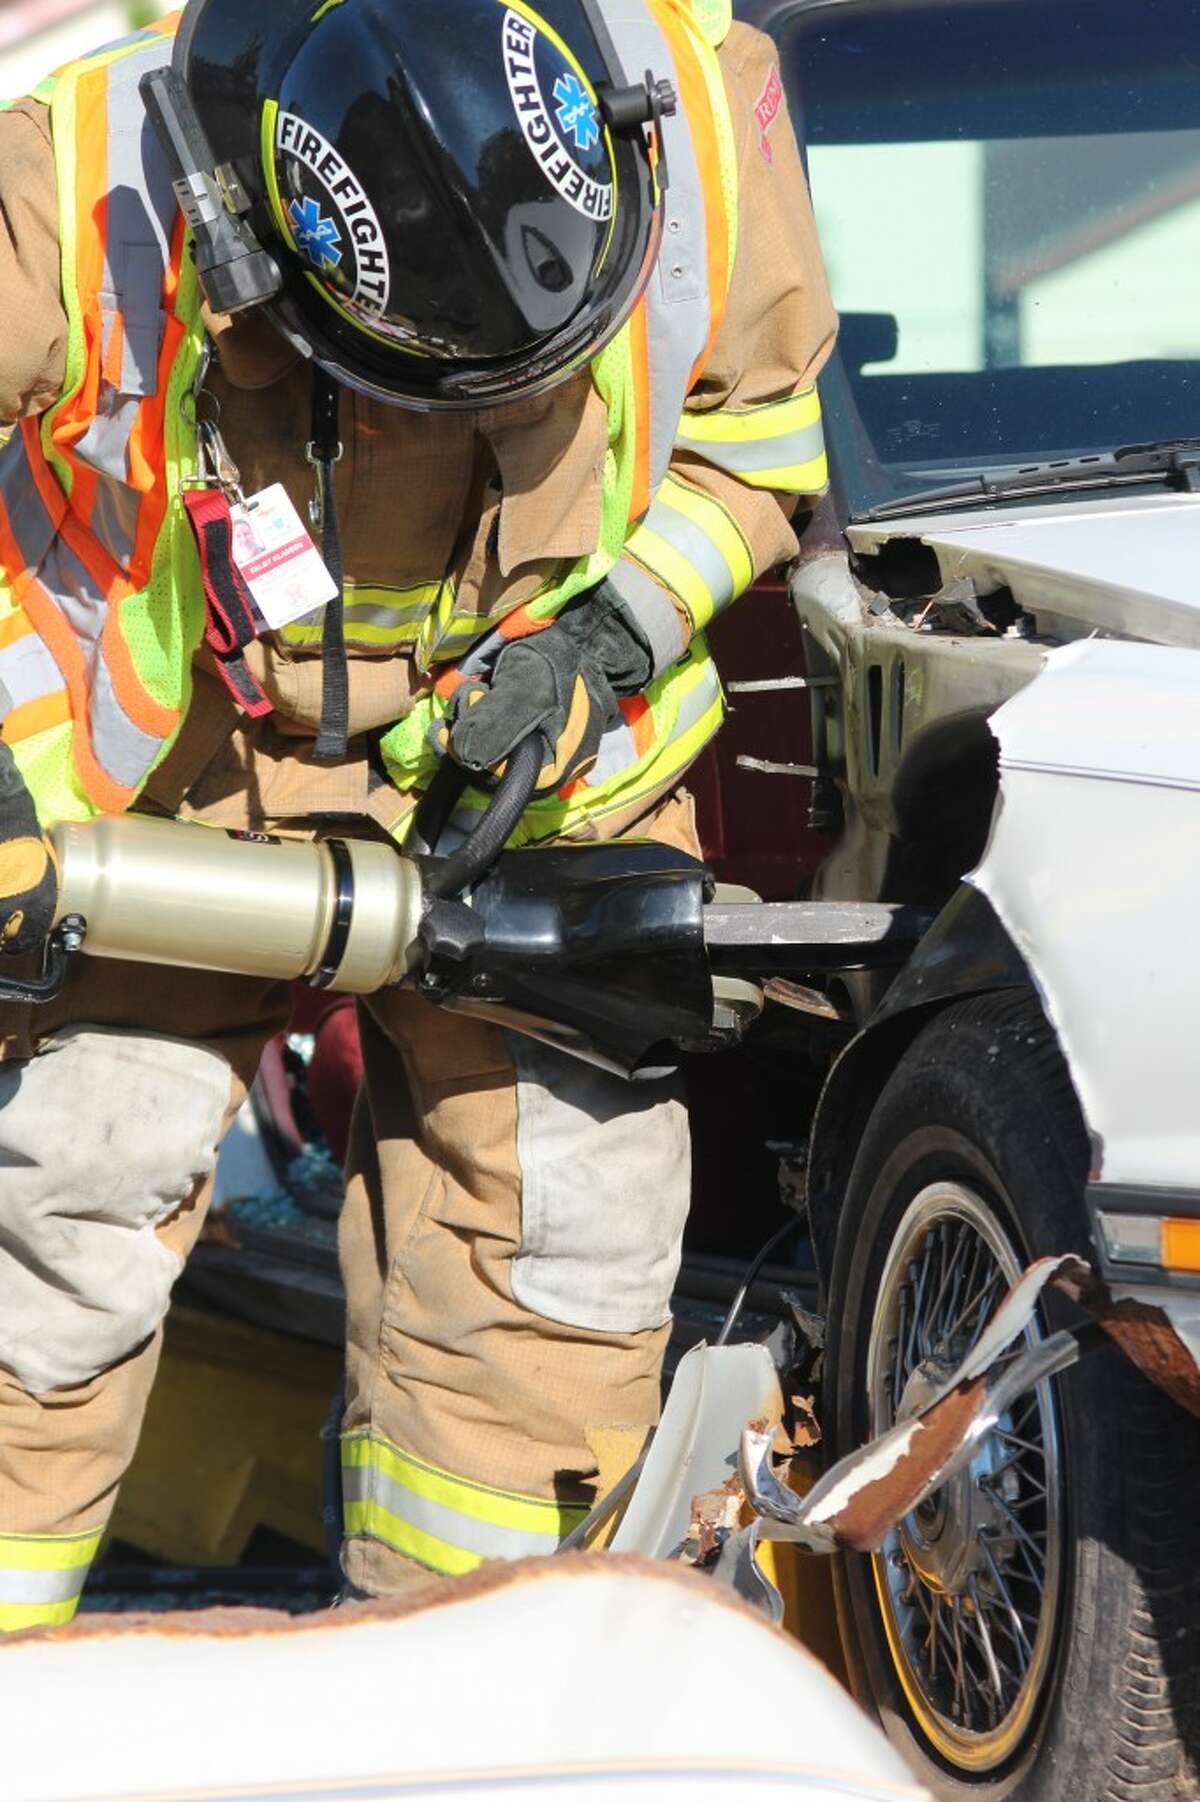 CLEAN CUT: Firefighters from the Reed City Fire Department uses a new hydraulic rescue tool to cut through a donated demo car during a practice exercise Tuesday. The new tools were purchased with a $16,000 AAA grant. (Herald Review photo/Sarah Neubecker)